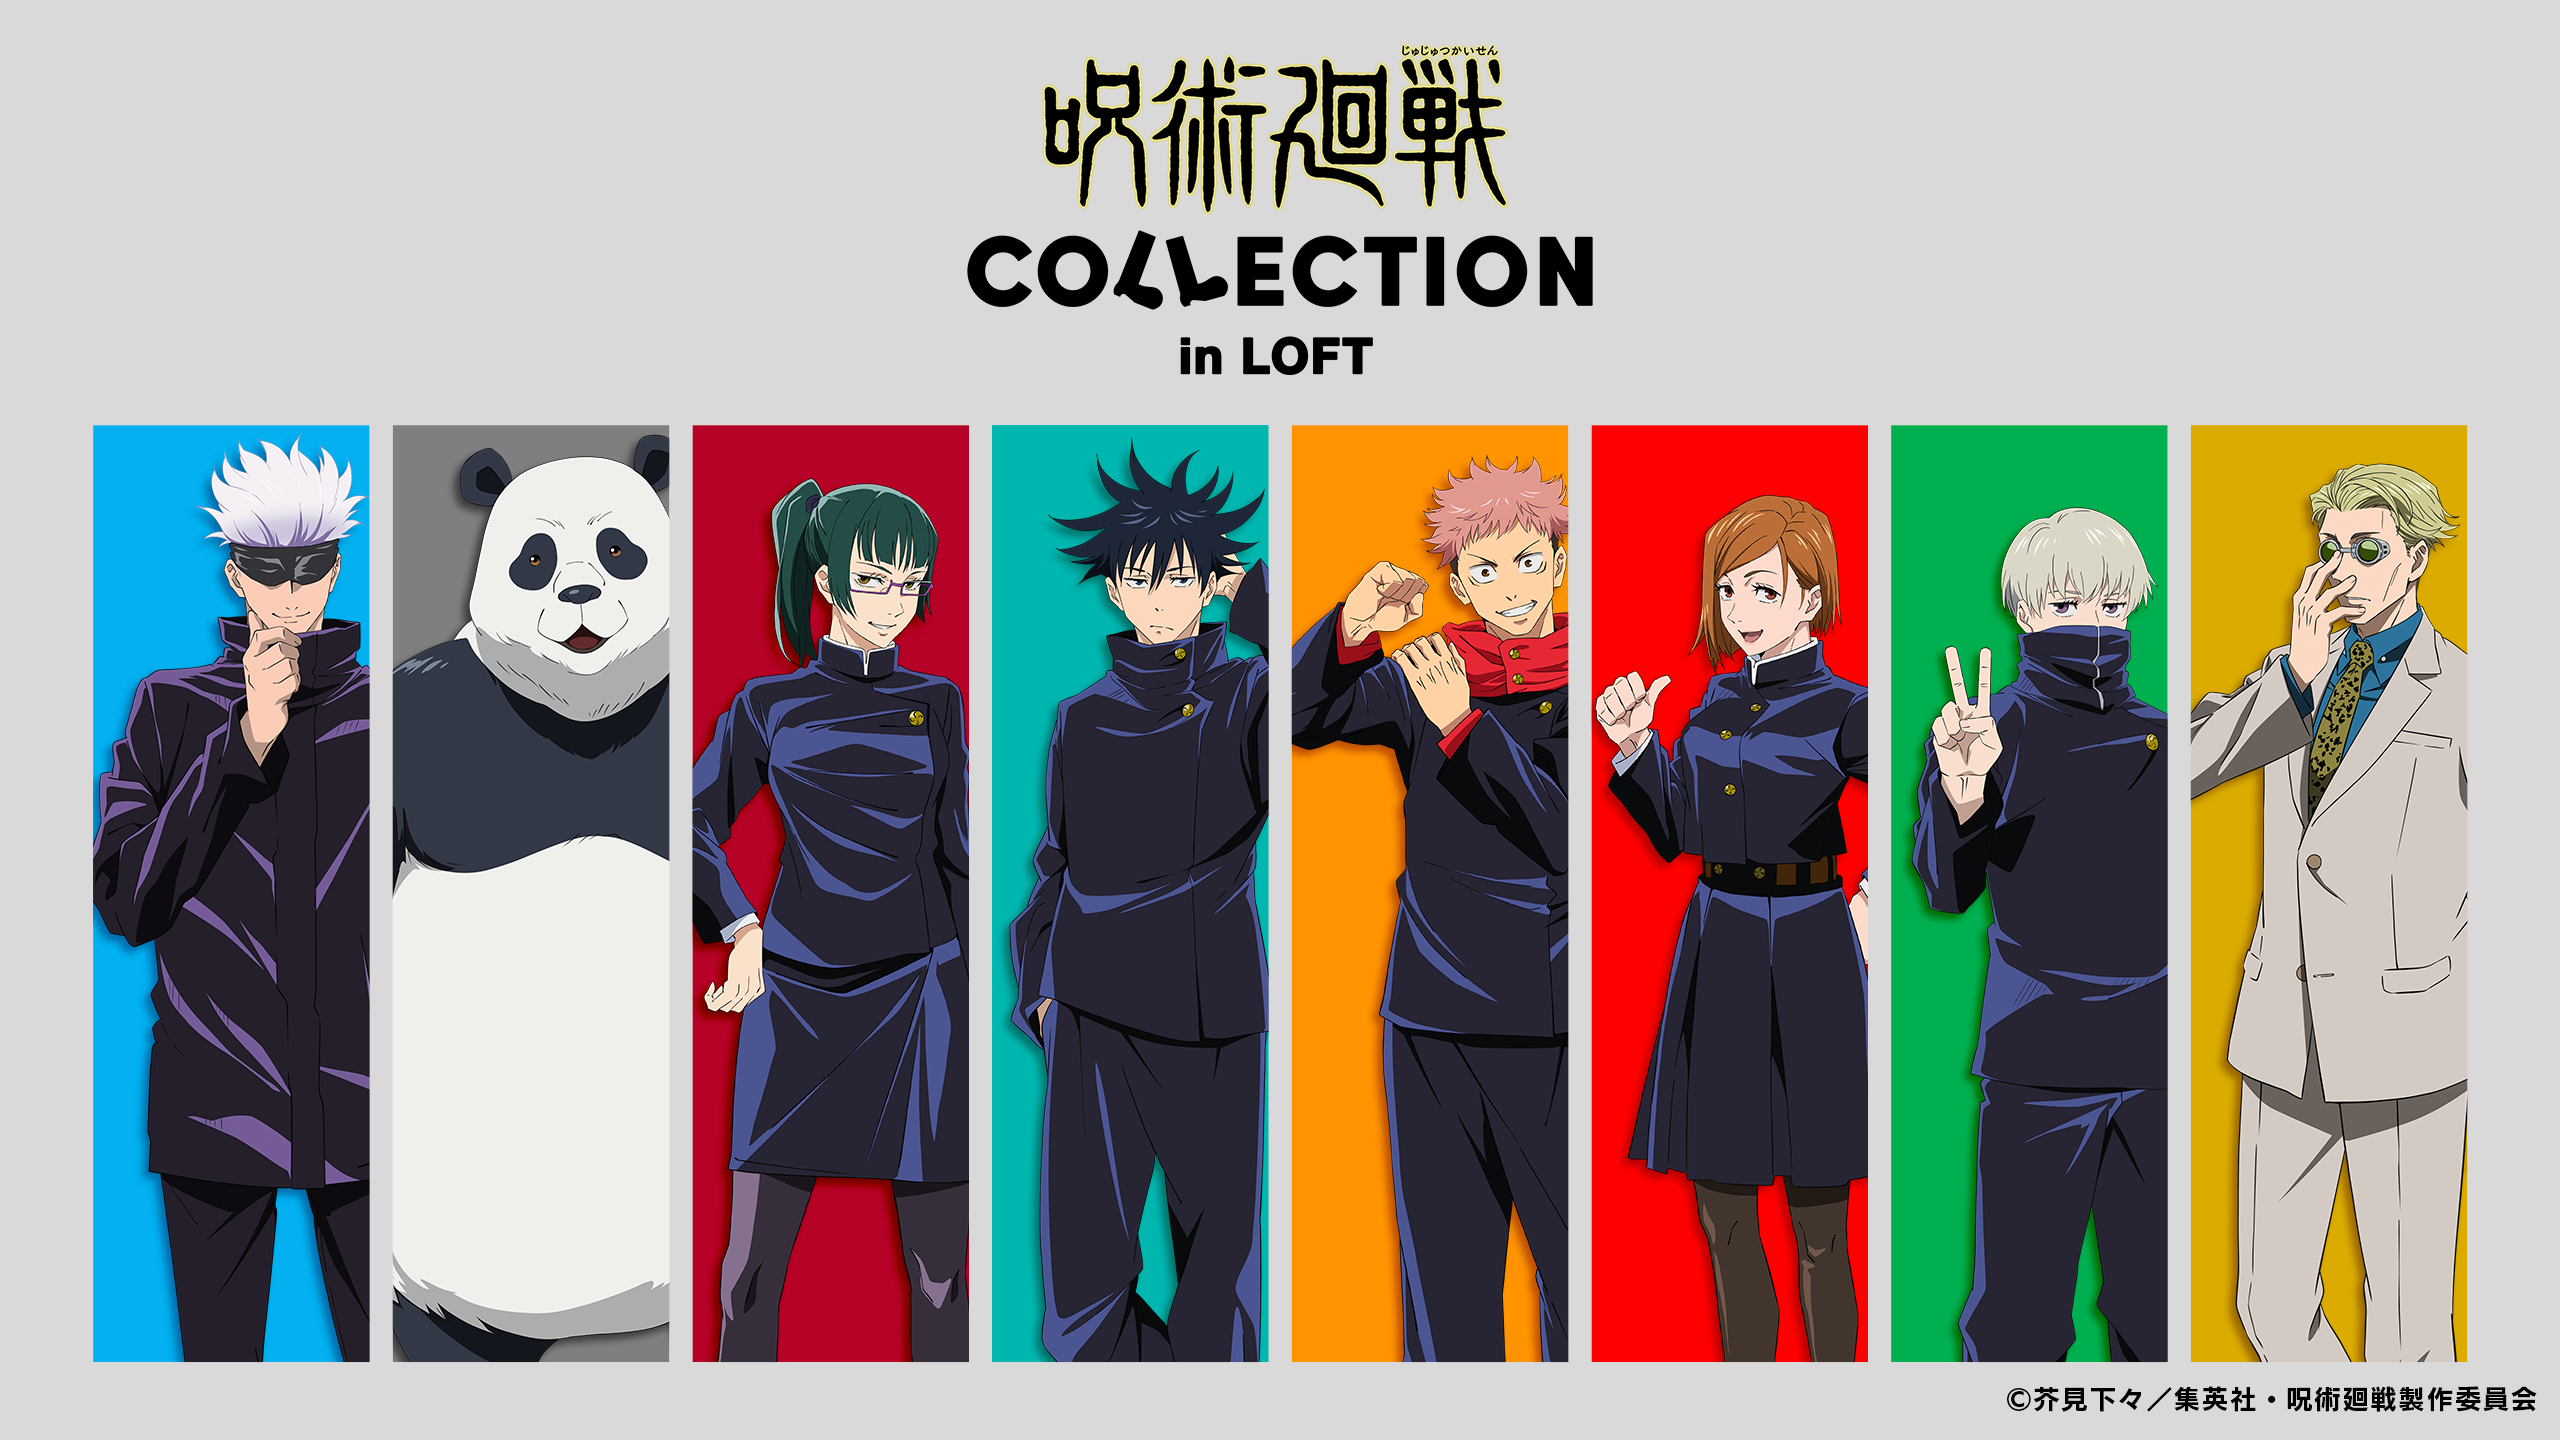 World Trigger Anime Series gets Valentine's Day Pop-Up Store at